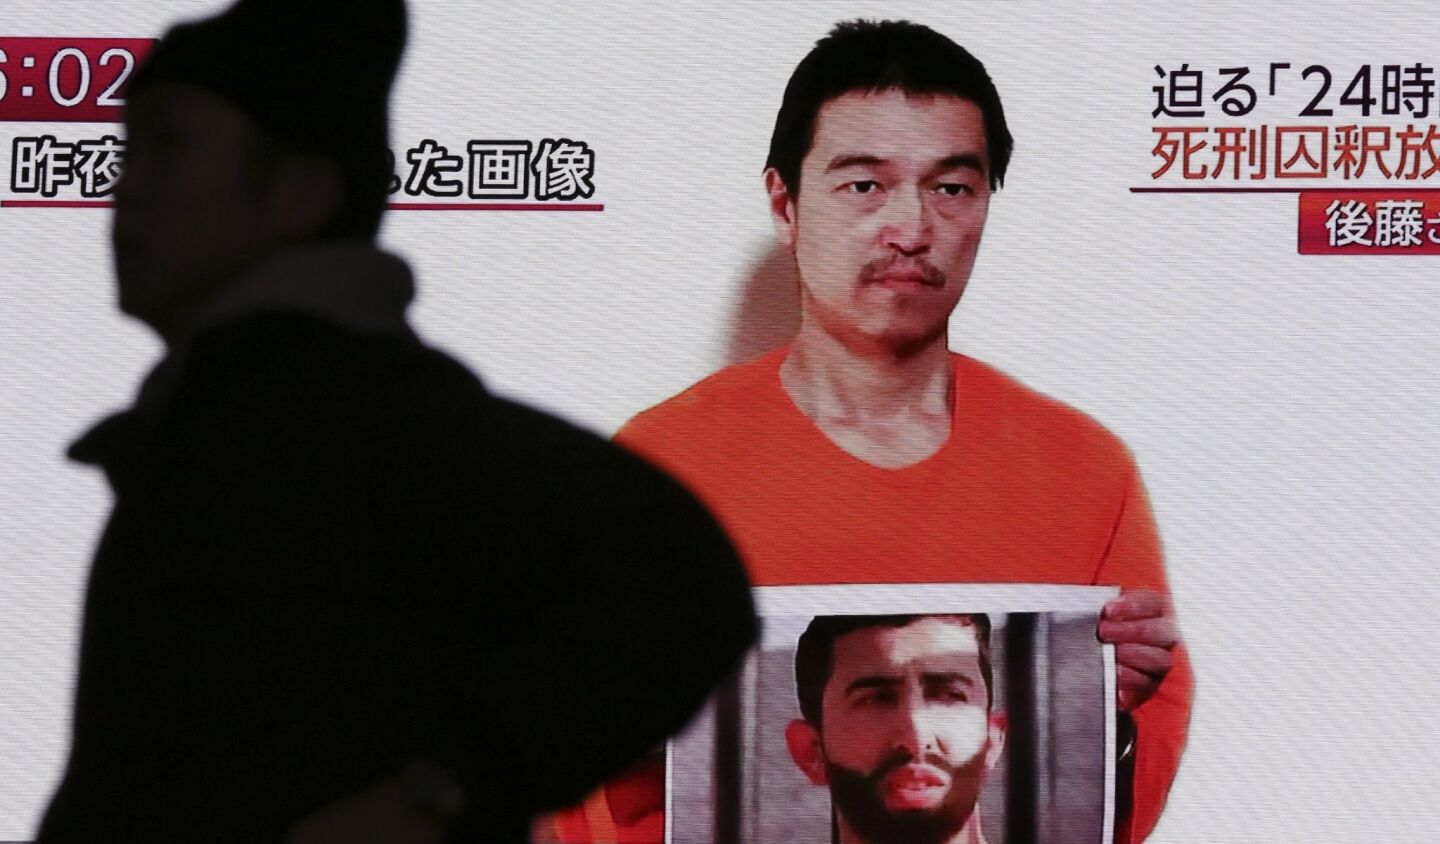 Japanese hostage Kenji Goto holds what appears to be a photo of Jordanian pilot Lt. Moaz Kasasbeh in a YouTube video projected on a big screen TV on Wednesday. The Islamic State hostage has reportedly been beheaded by his captors.